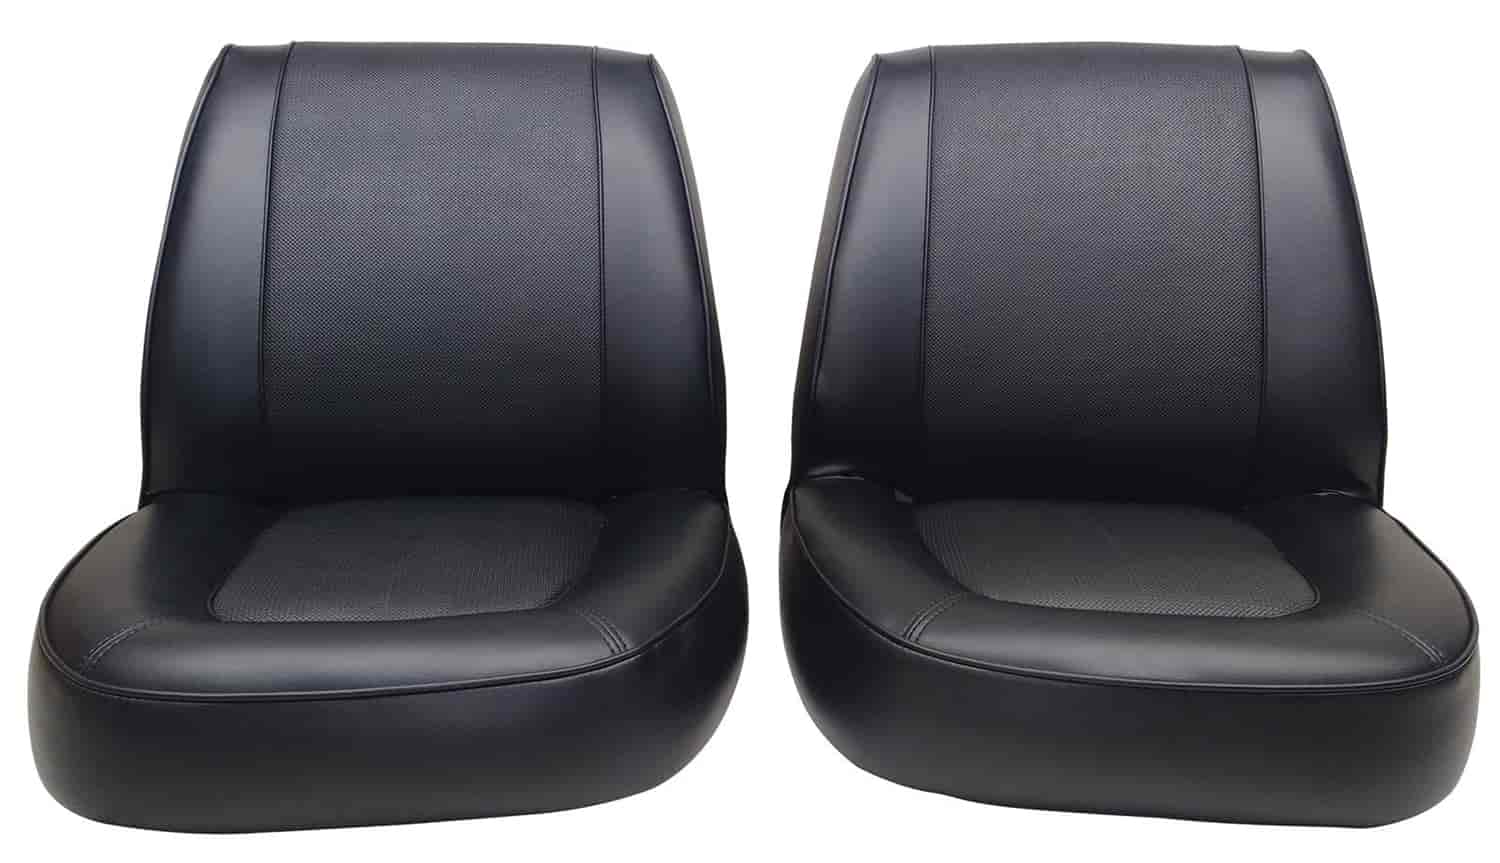 1963 Ford Falcon Futura, Sport Convertible Interior Front Bucket Seat Upholstery Set